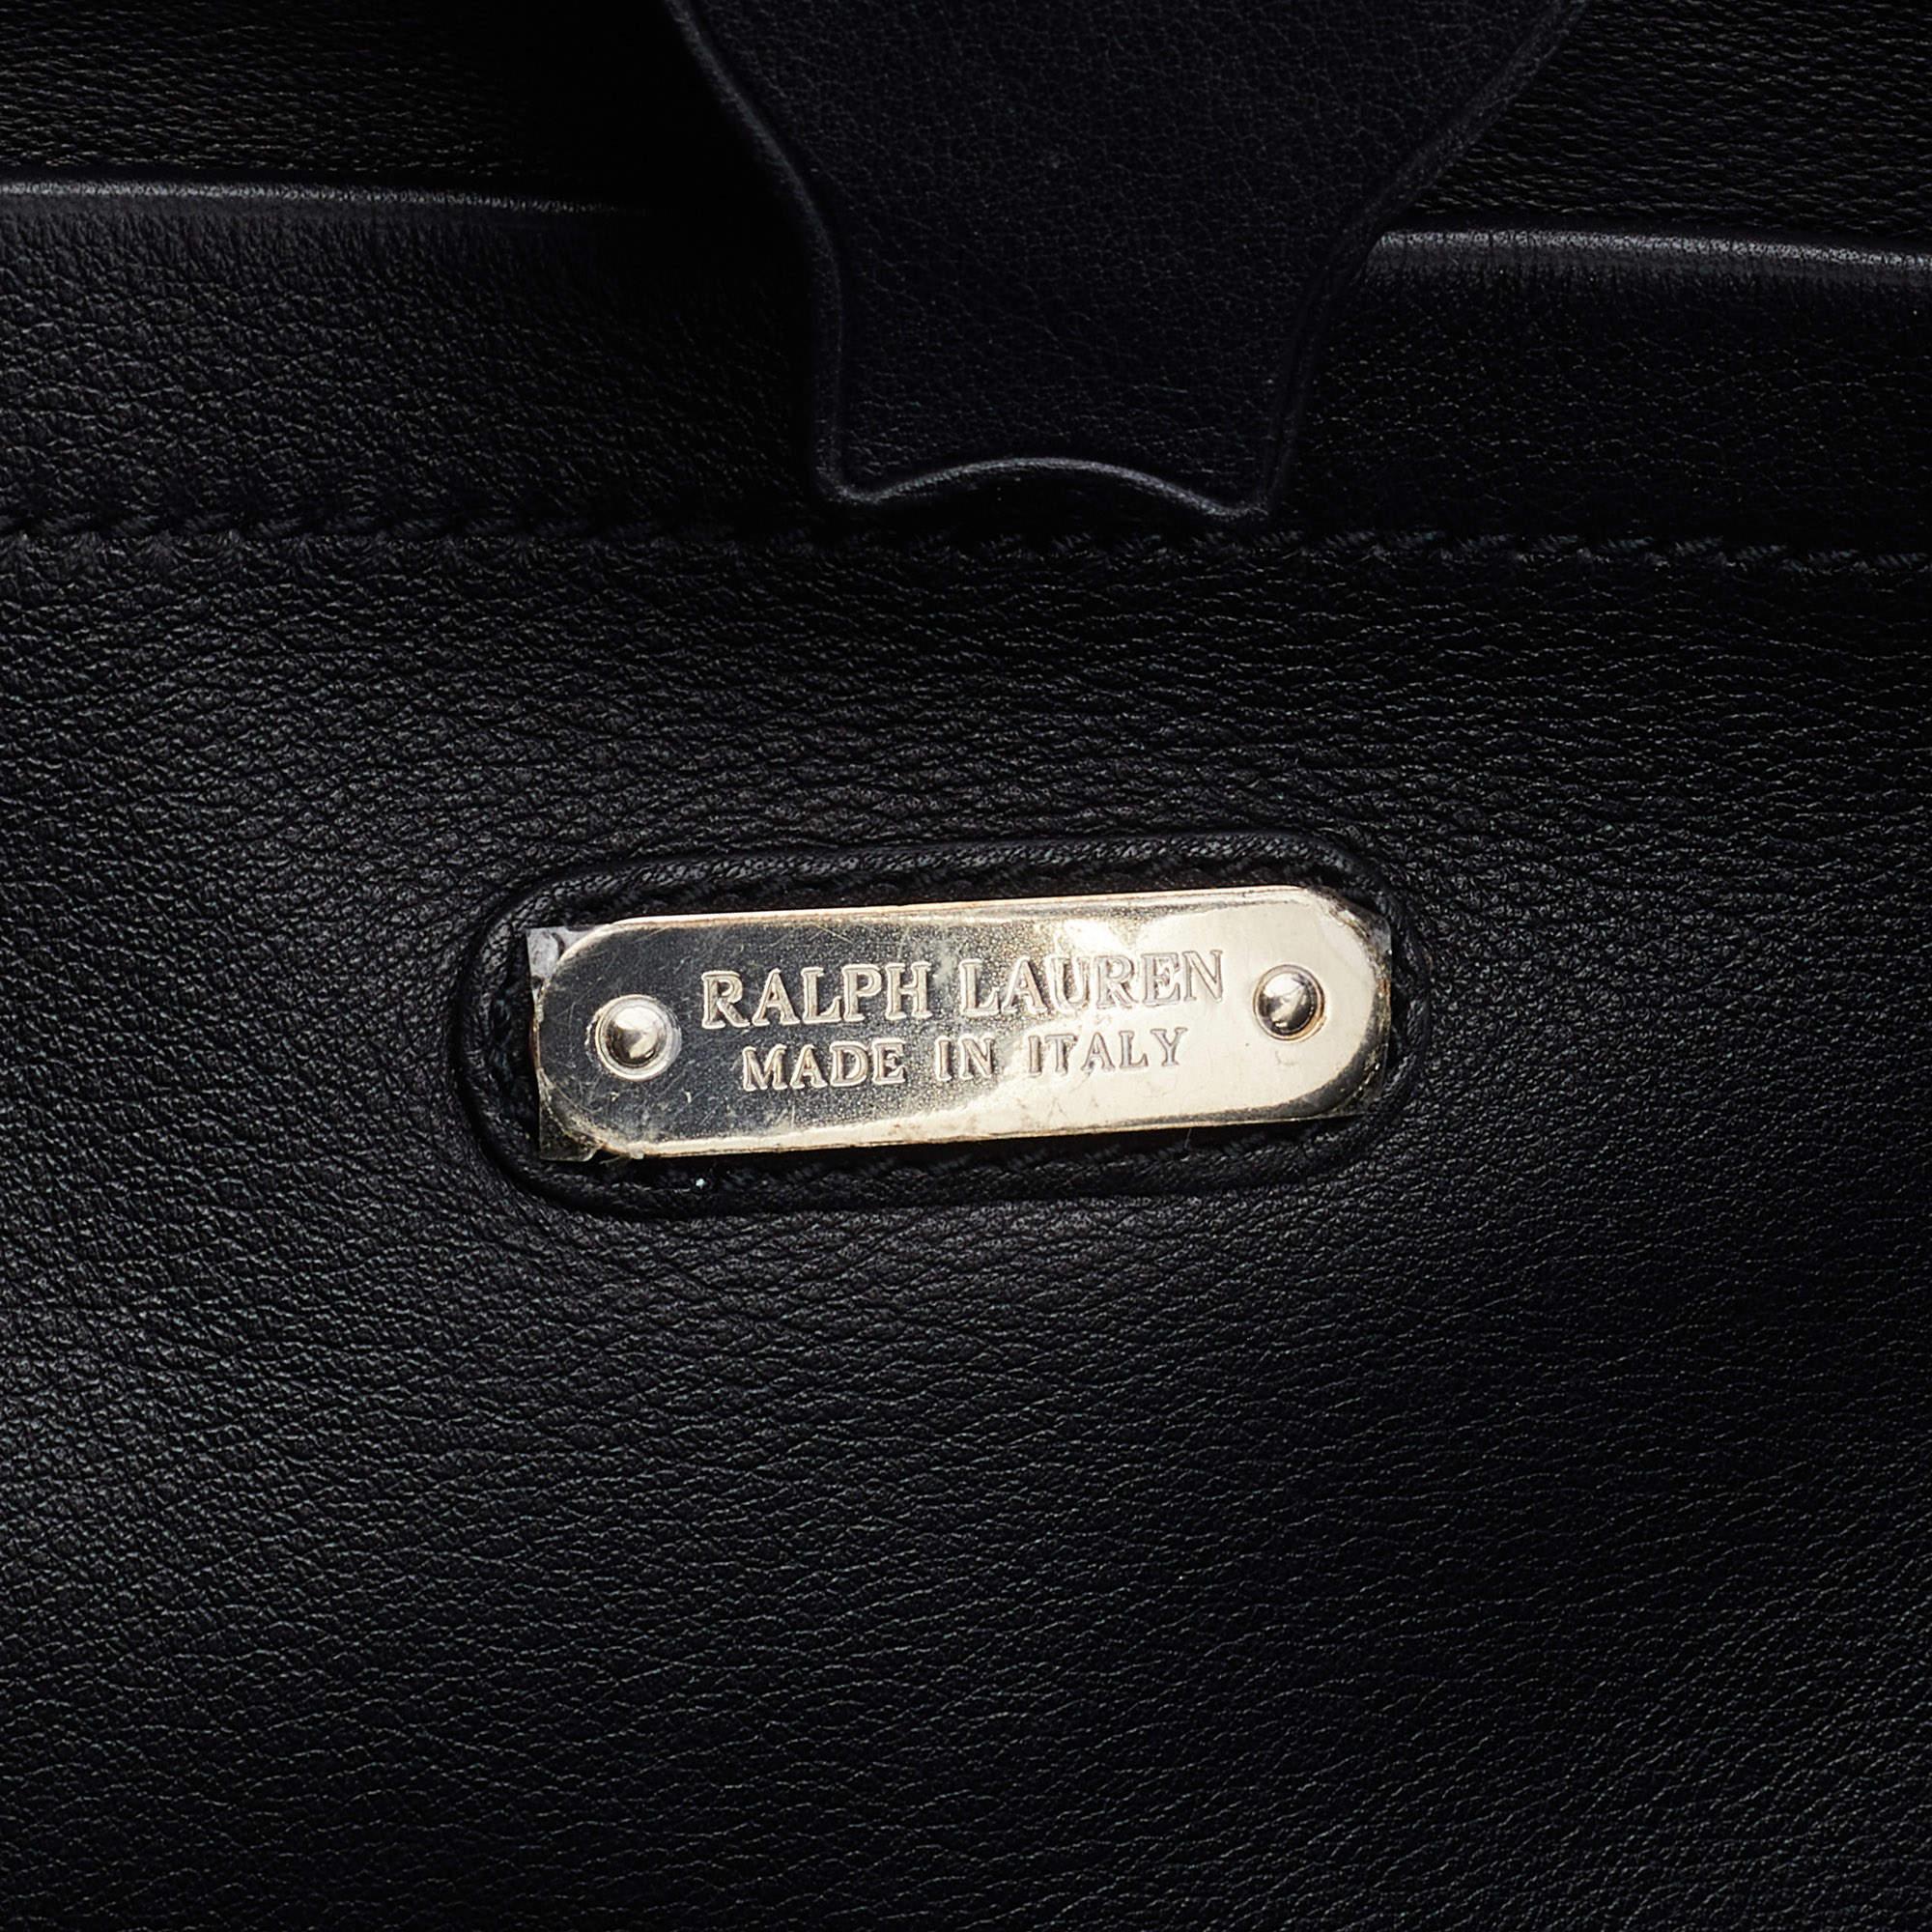 Ralph Lauren Black/White Leather Soft Ricky Tote 6